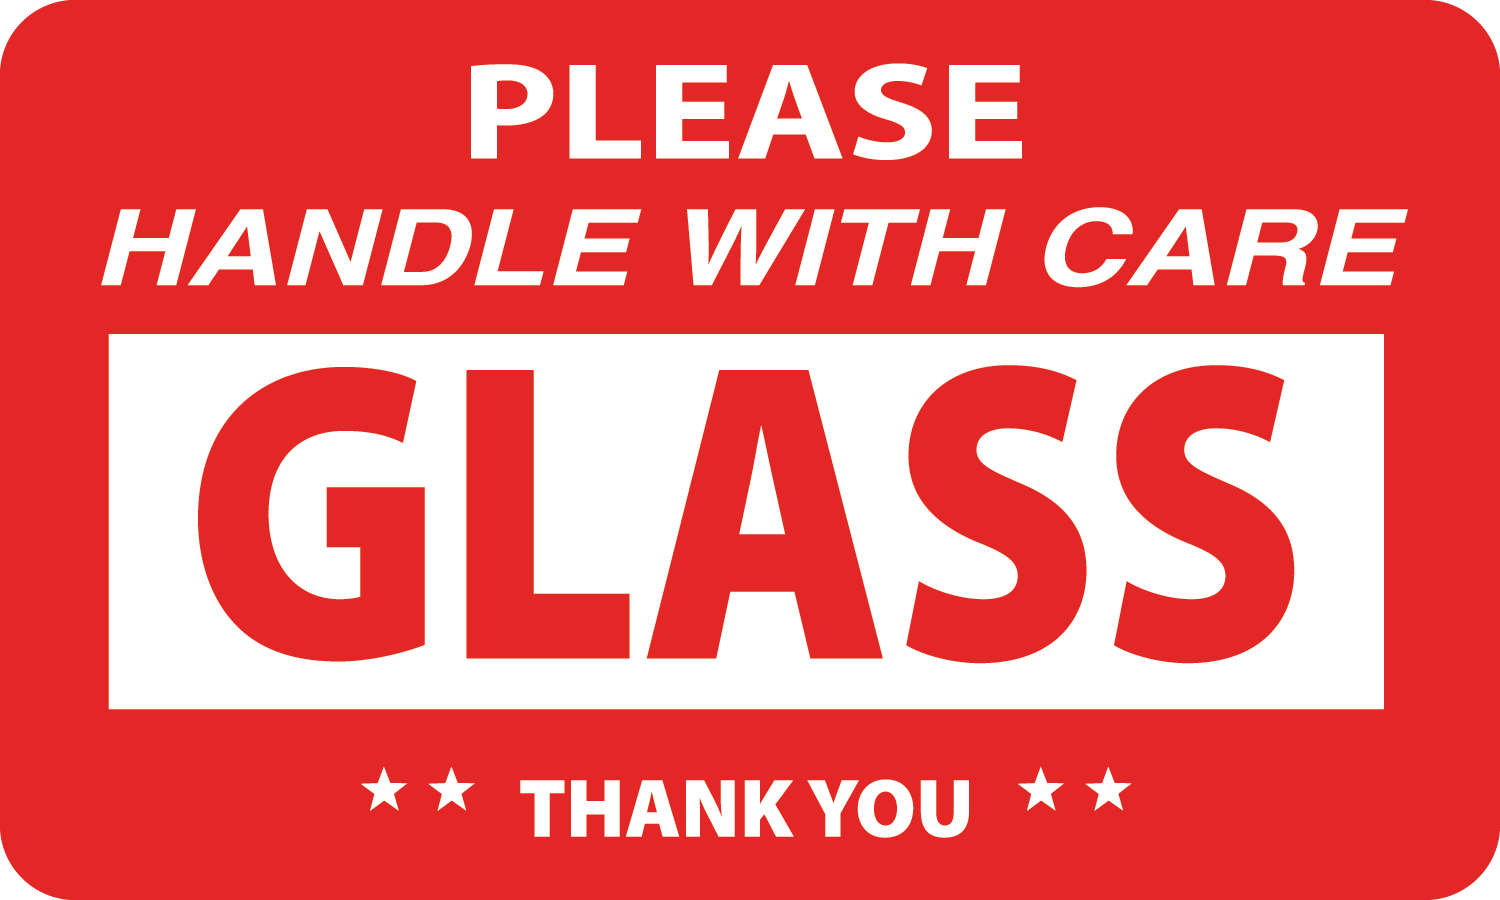 3" x 5" "PLEASE HANDLE WITH CARE GLASS" Label